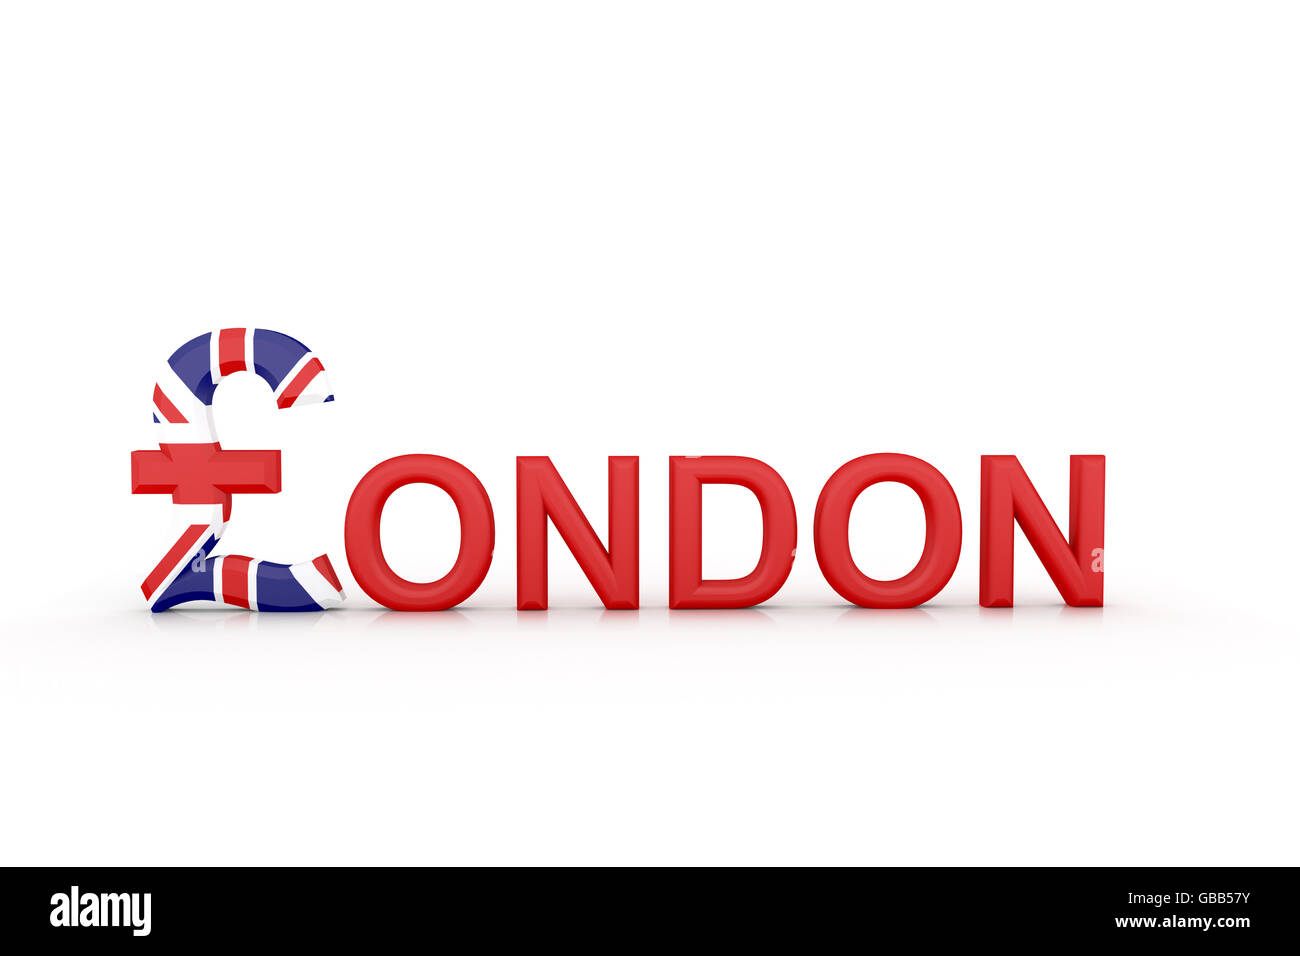 3d illustration Text London with currency symbol Stock Photo